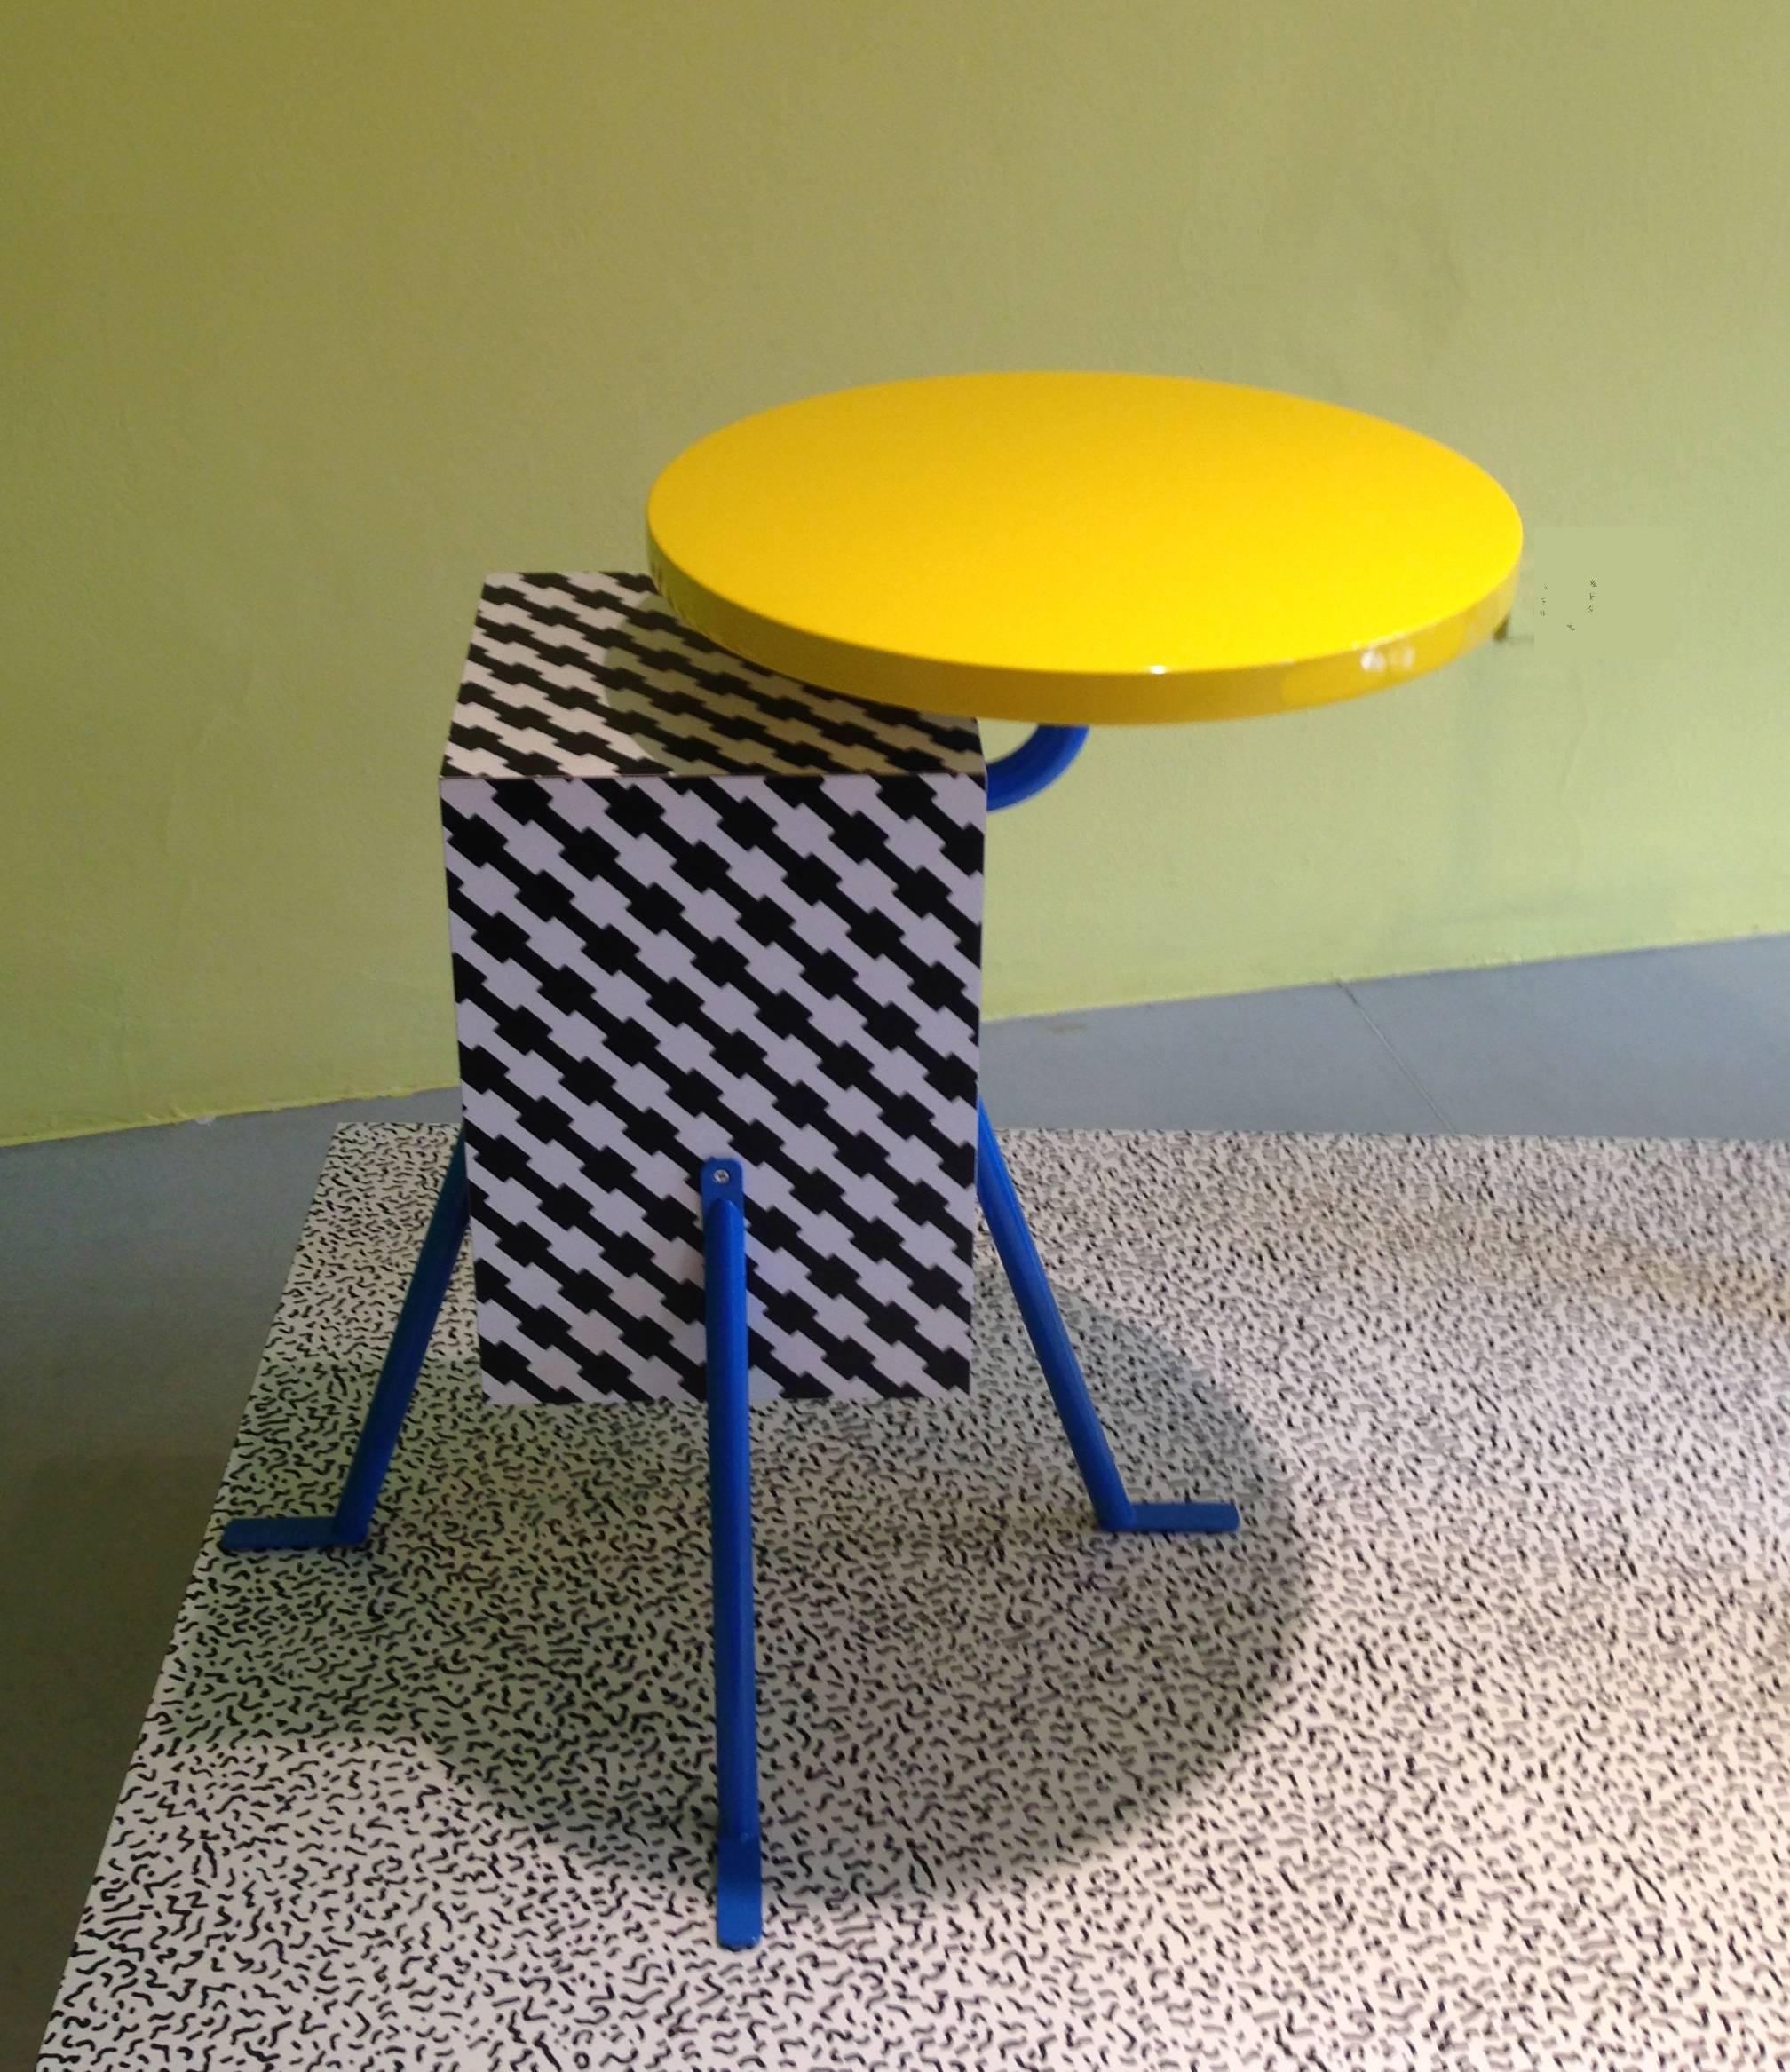 From the inaugural 1981 Memphis collection, this very popular design by Michele De Lucchi (one of the founding members of the design collective) implements a De Lucchi laminate design named 